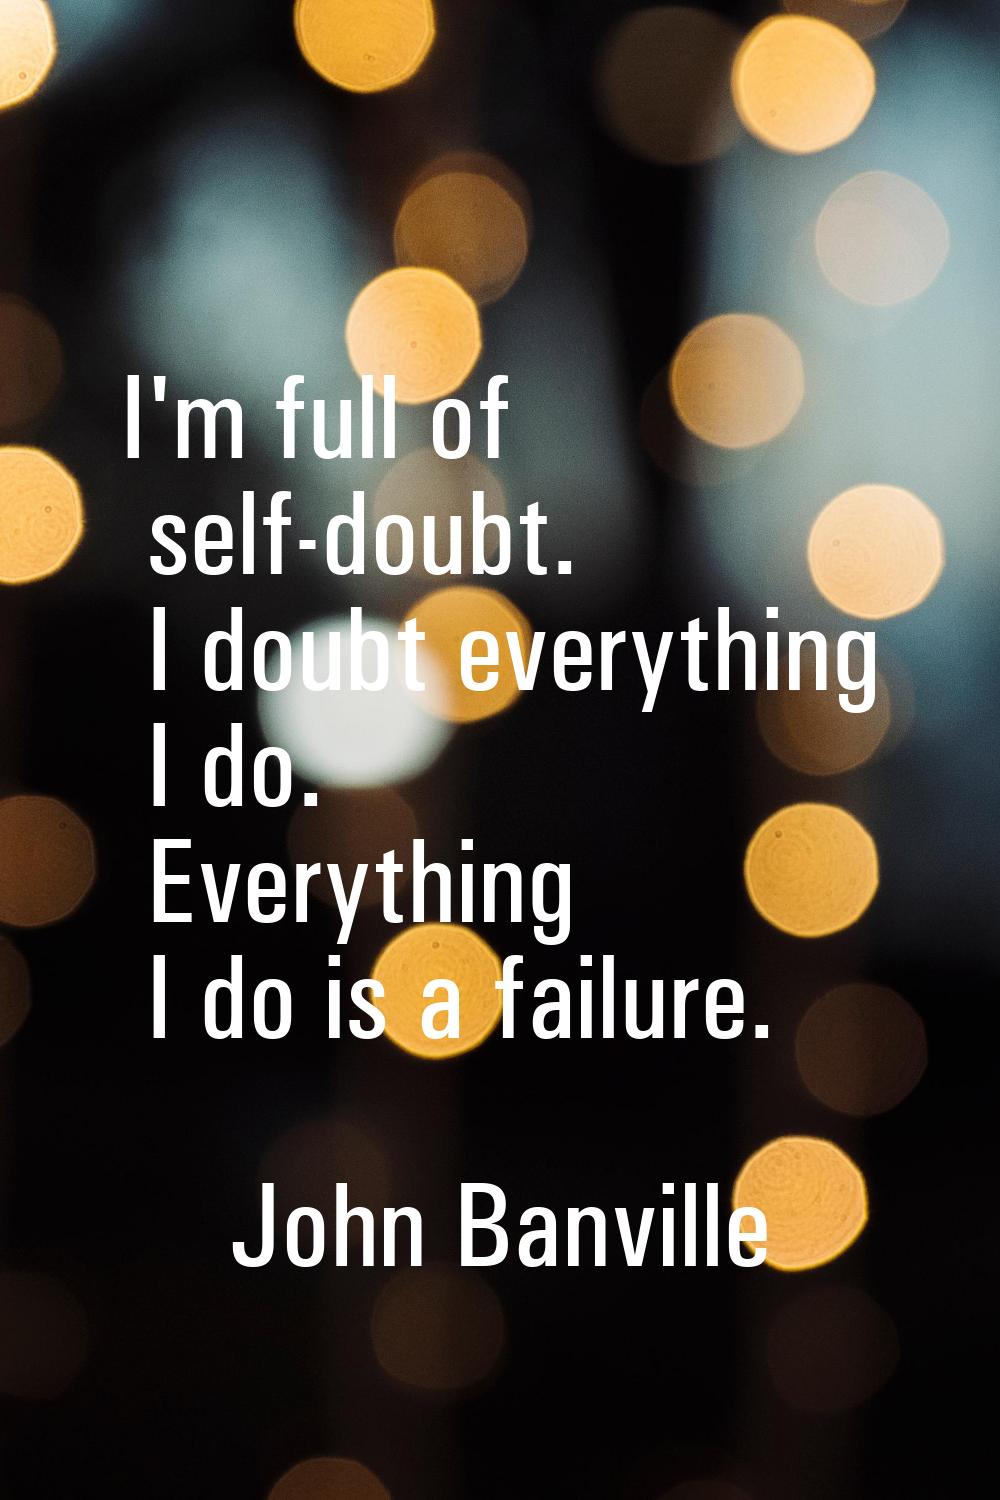 I'm full of self-doubt. I doubt everything I do. Everything I do is a failure.